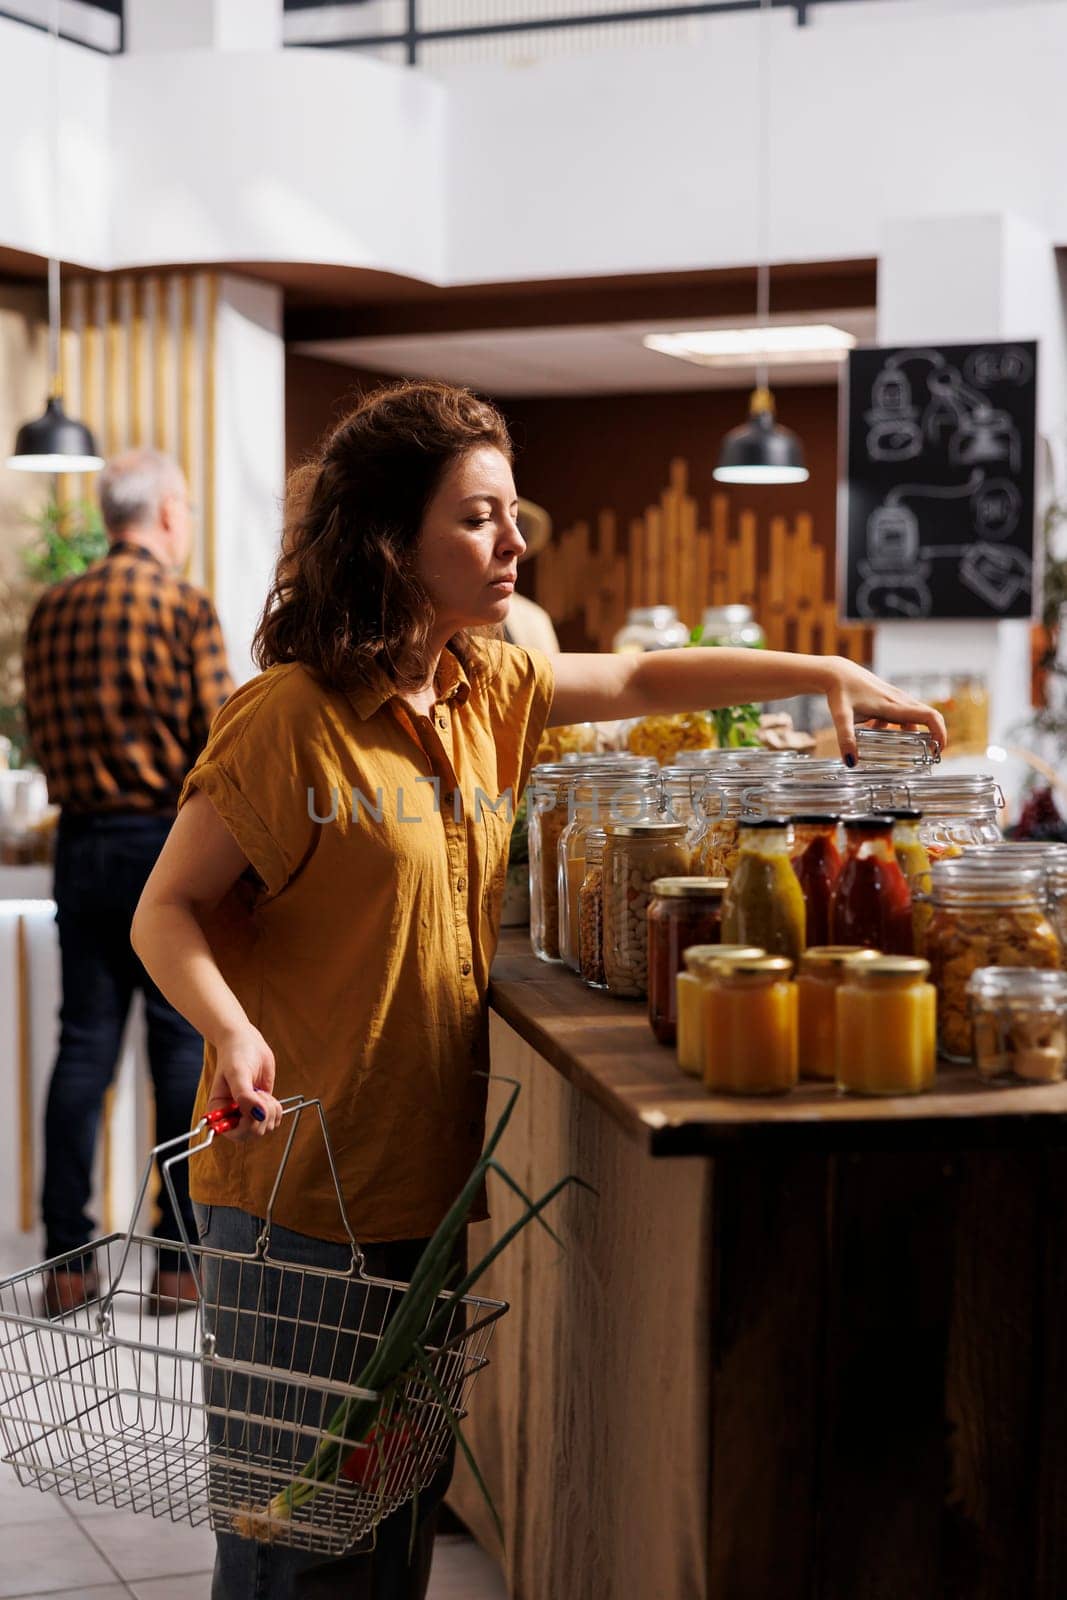 Woman holding shopping basket, buying ecofriendly bulk products in zero waste store designed to minimize plastic usage. Green living customer looking for nutritious groceries